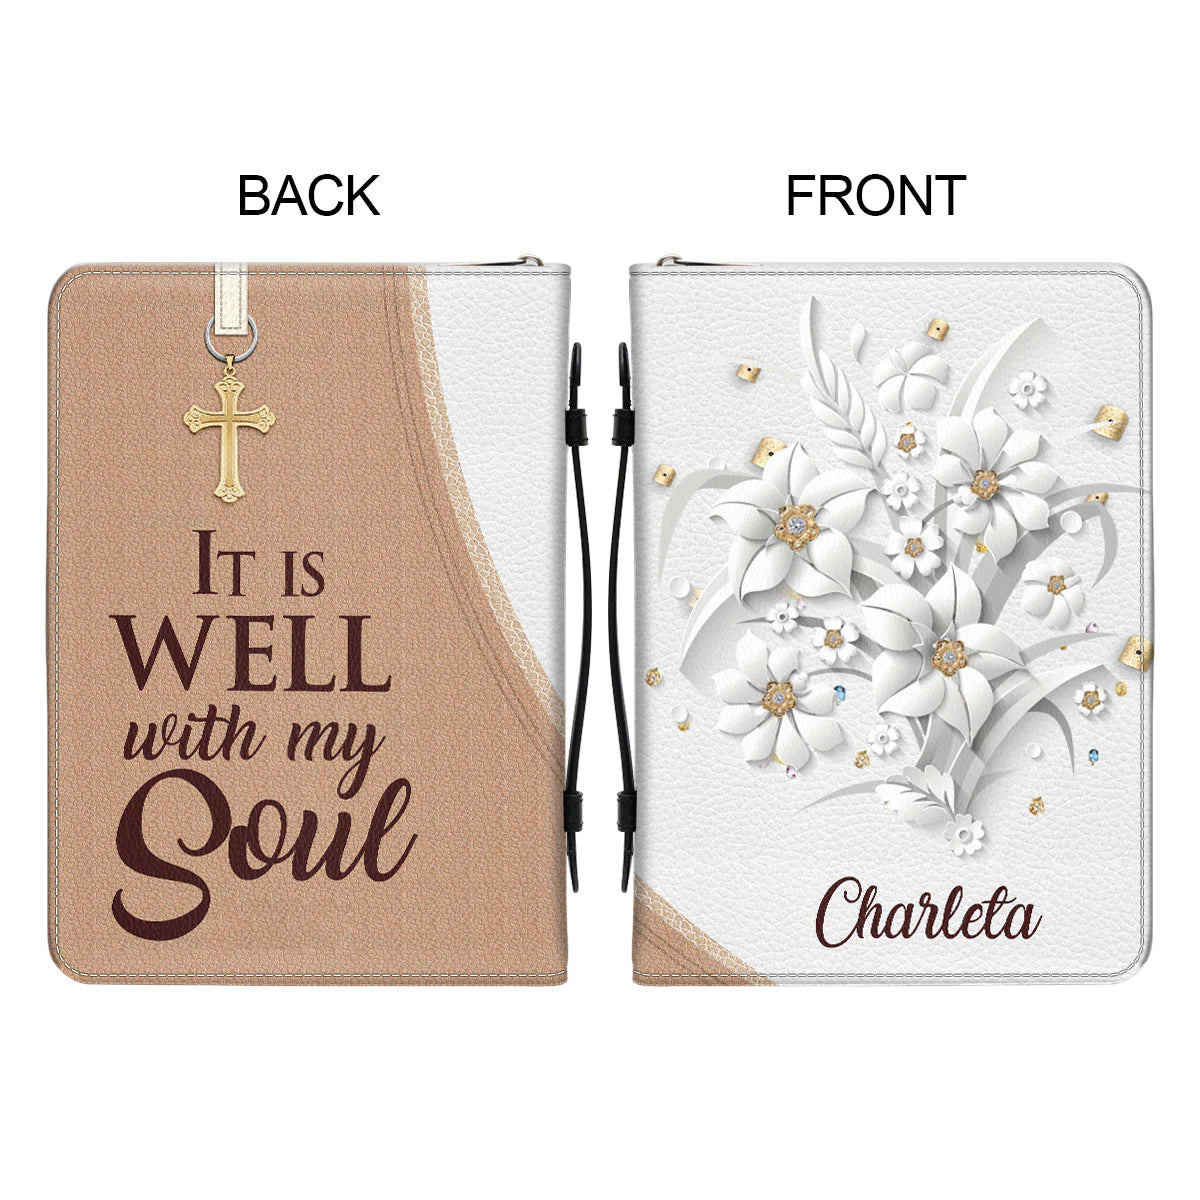 Christianart Bible Cover, It Is Well With My Soul, Personalized Gifts for Pastor. Gifts For Women. - Christian Art Bag